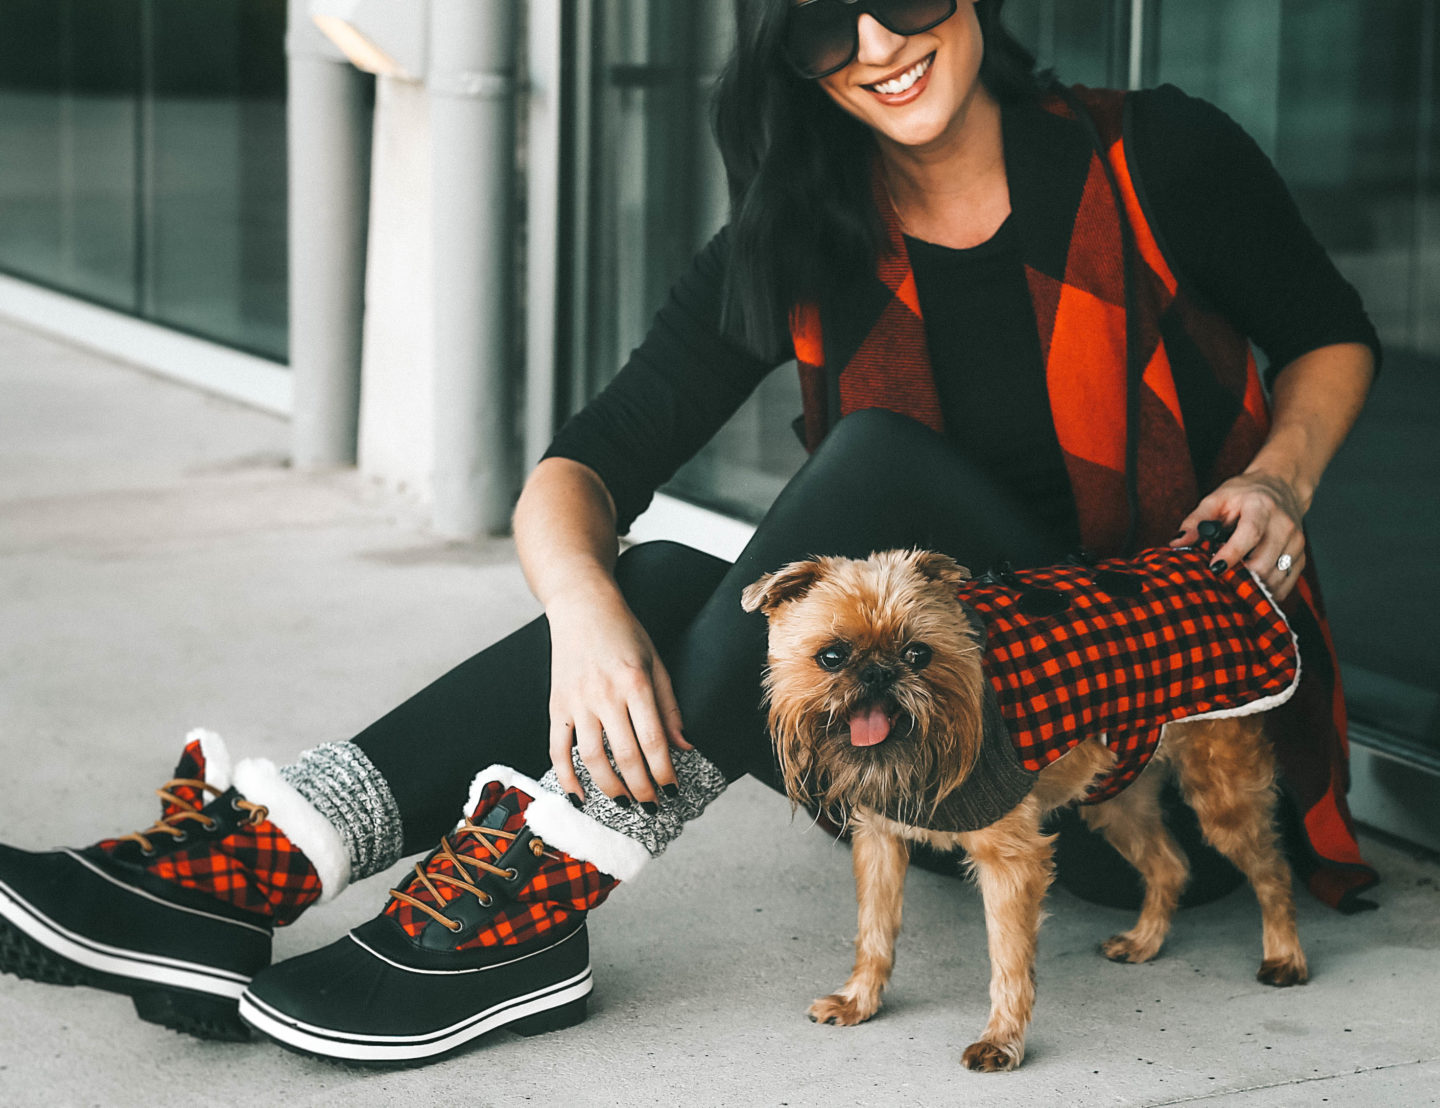 Matching Dog and Owner Outfits for the Holidays by popular Austin life and style blog, Dressed to Kill: image of an owner and her dog wearing an Amazon KIRJAUDU Womens Lapel Open Front Sleeveless Plaid Vest Cardigan with Pockets, Nordstrom Halogen Long Sleeve Modal Blend Tee, Nordstrom Spanx Faux Leather Leggings, Amazon GLOBALWIN Women's 1632 Black Grey Snow Boots, Bare Necessities BAREFOOT DREAMS COZYCHIC HEATHERED PLUSH SOCKS, and Chewy plaid sweater.